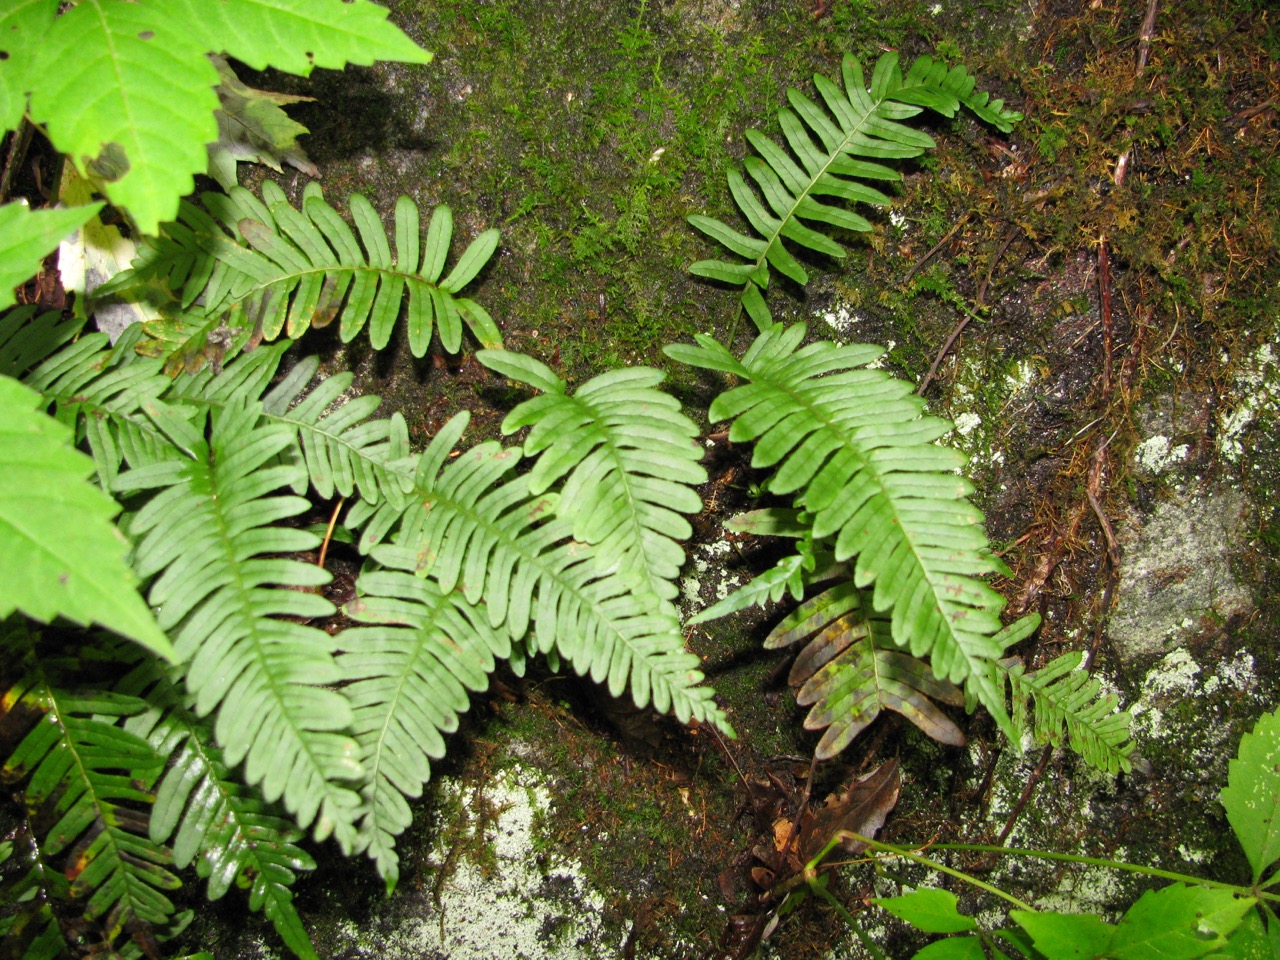 The Scientific Name is Polypodium virginianum [= Polypodium vulgare]. You will likely hear them called Rock Polypody, Rock Cap Fern. This picture shows the Leaf blades are widest in the middle and mostly have attenuated, unlobed tips. of Polypodium virginianum [= Polypodium vulgare]